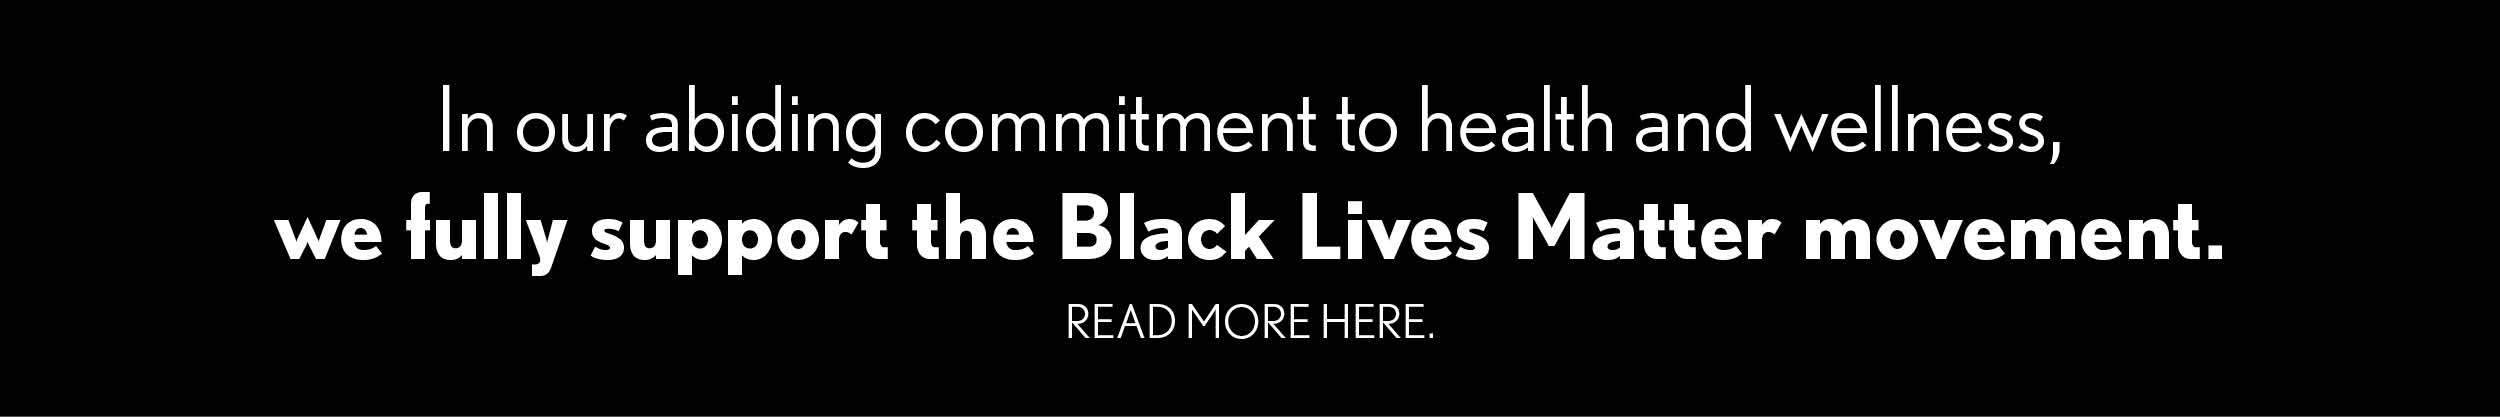 In our abiding commitment to health and wellness, we fully support the Black Lives Matter movement. Read more here.